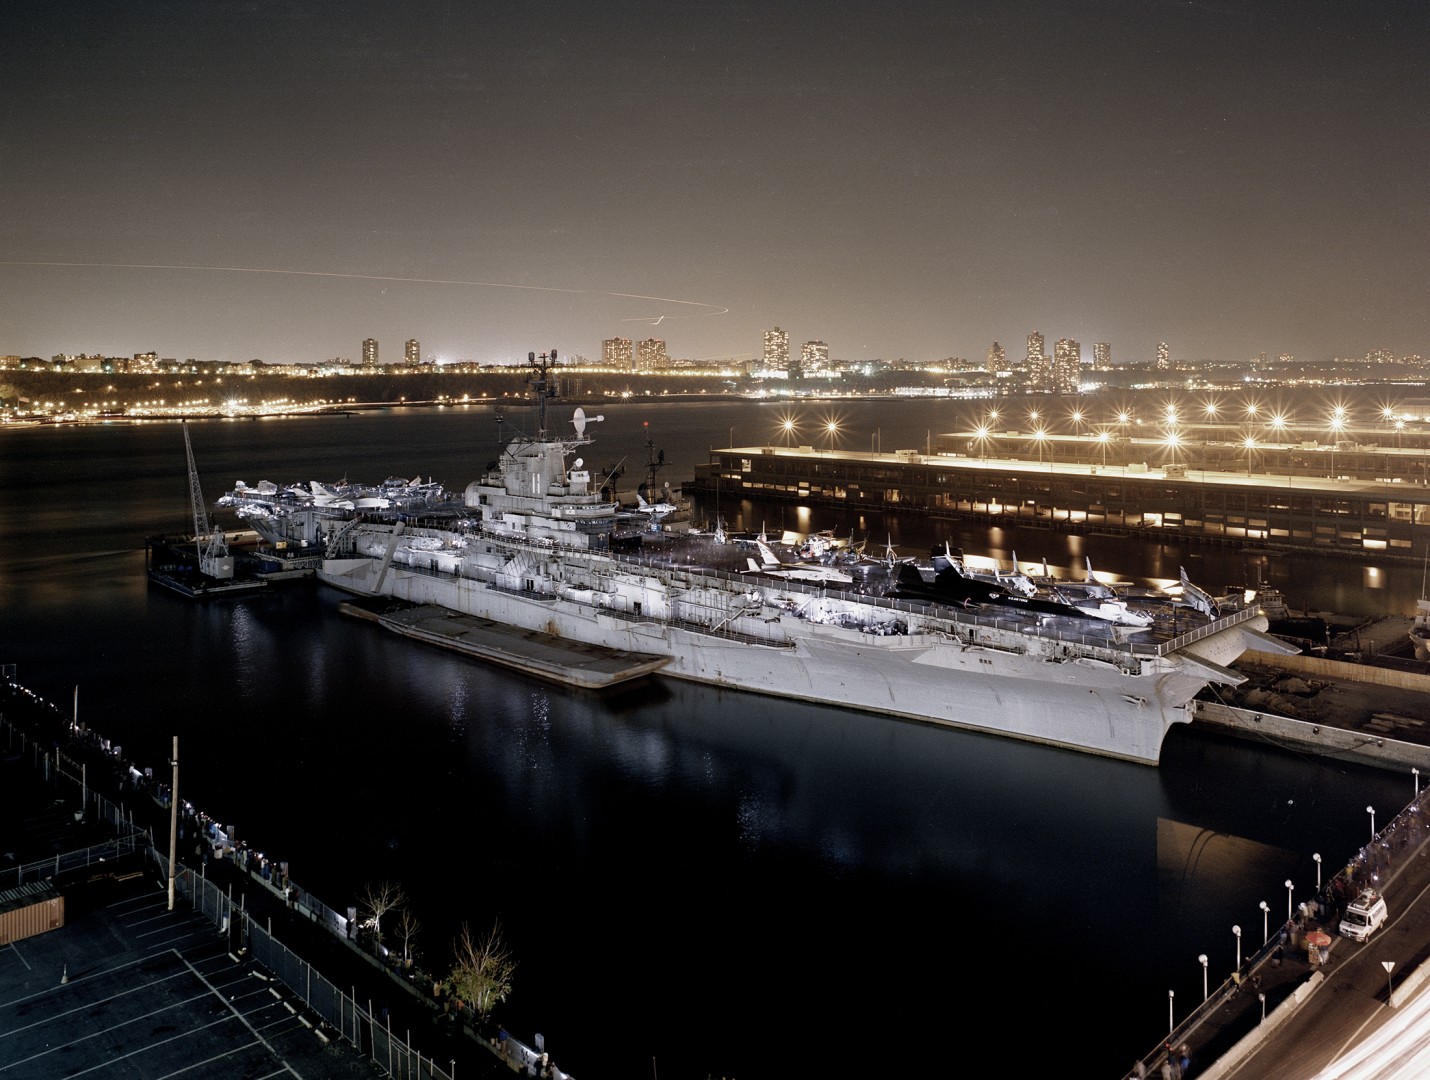 A nighttime photo of the Intrepid Sea, Air, and Space Museum.